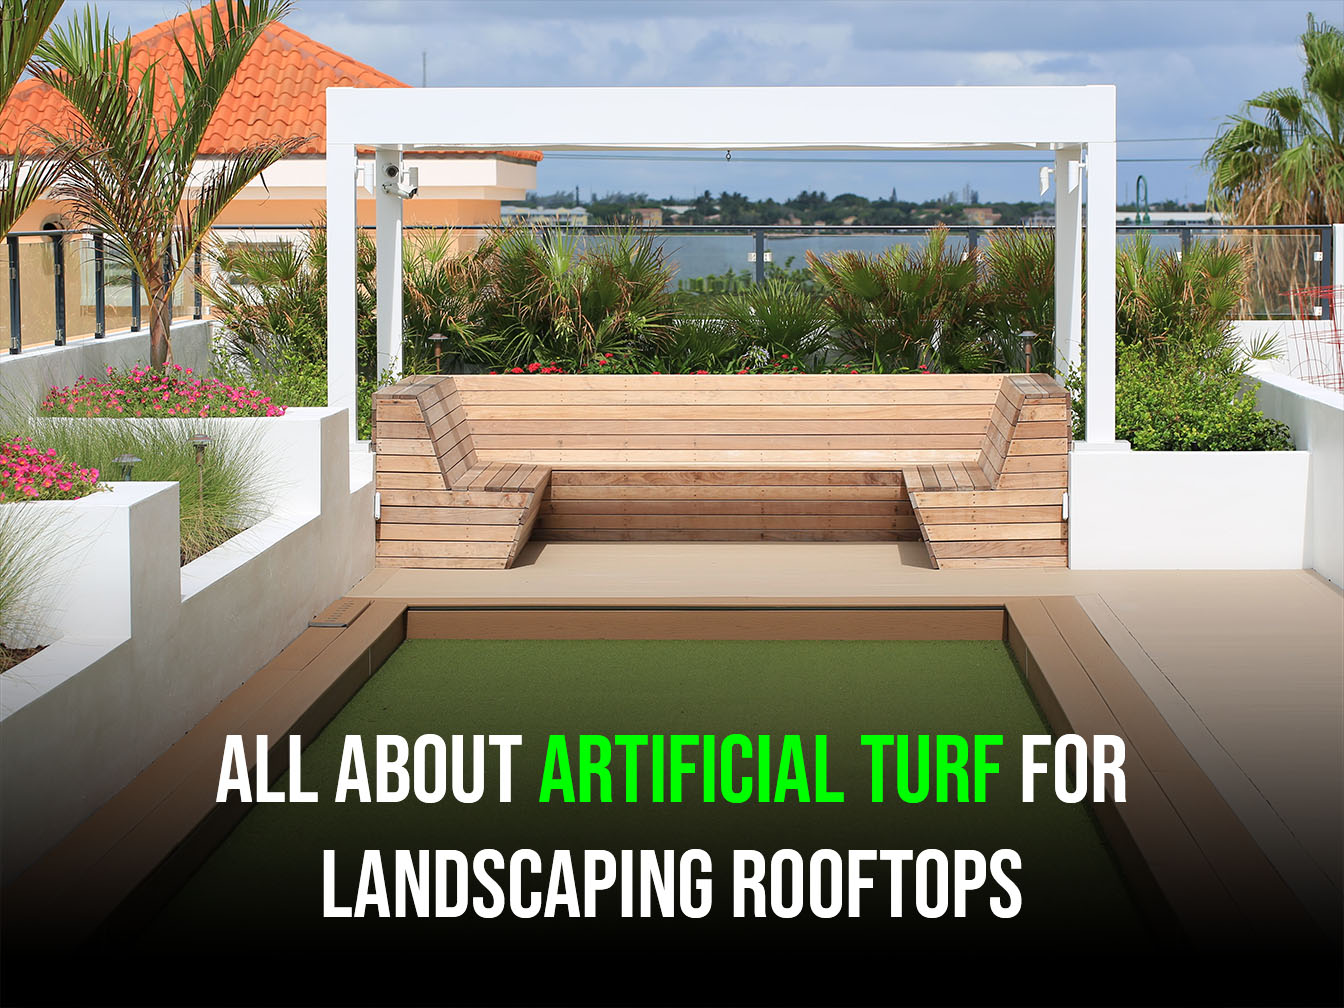 Can You Use Artificial Turf for Landscaping Rooftops? Straight Answers